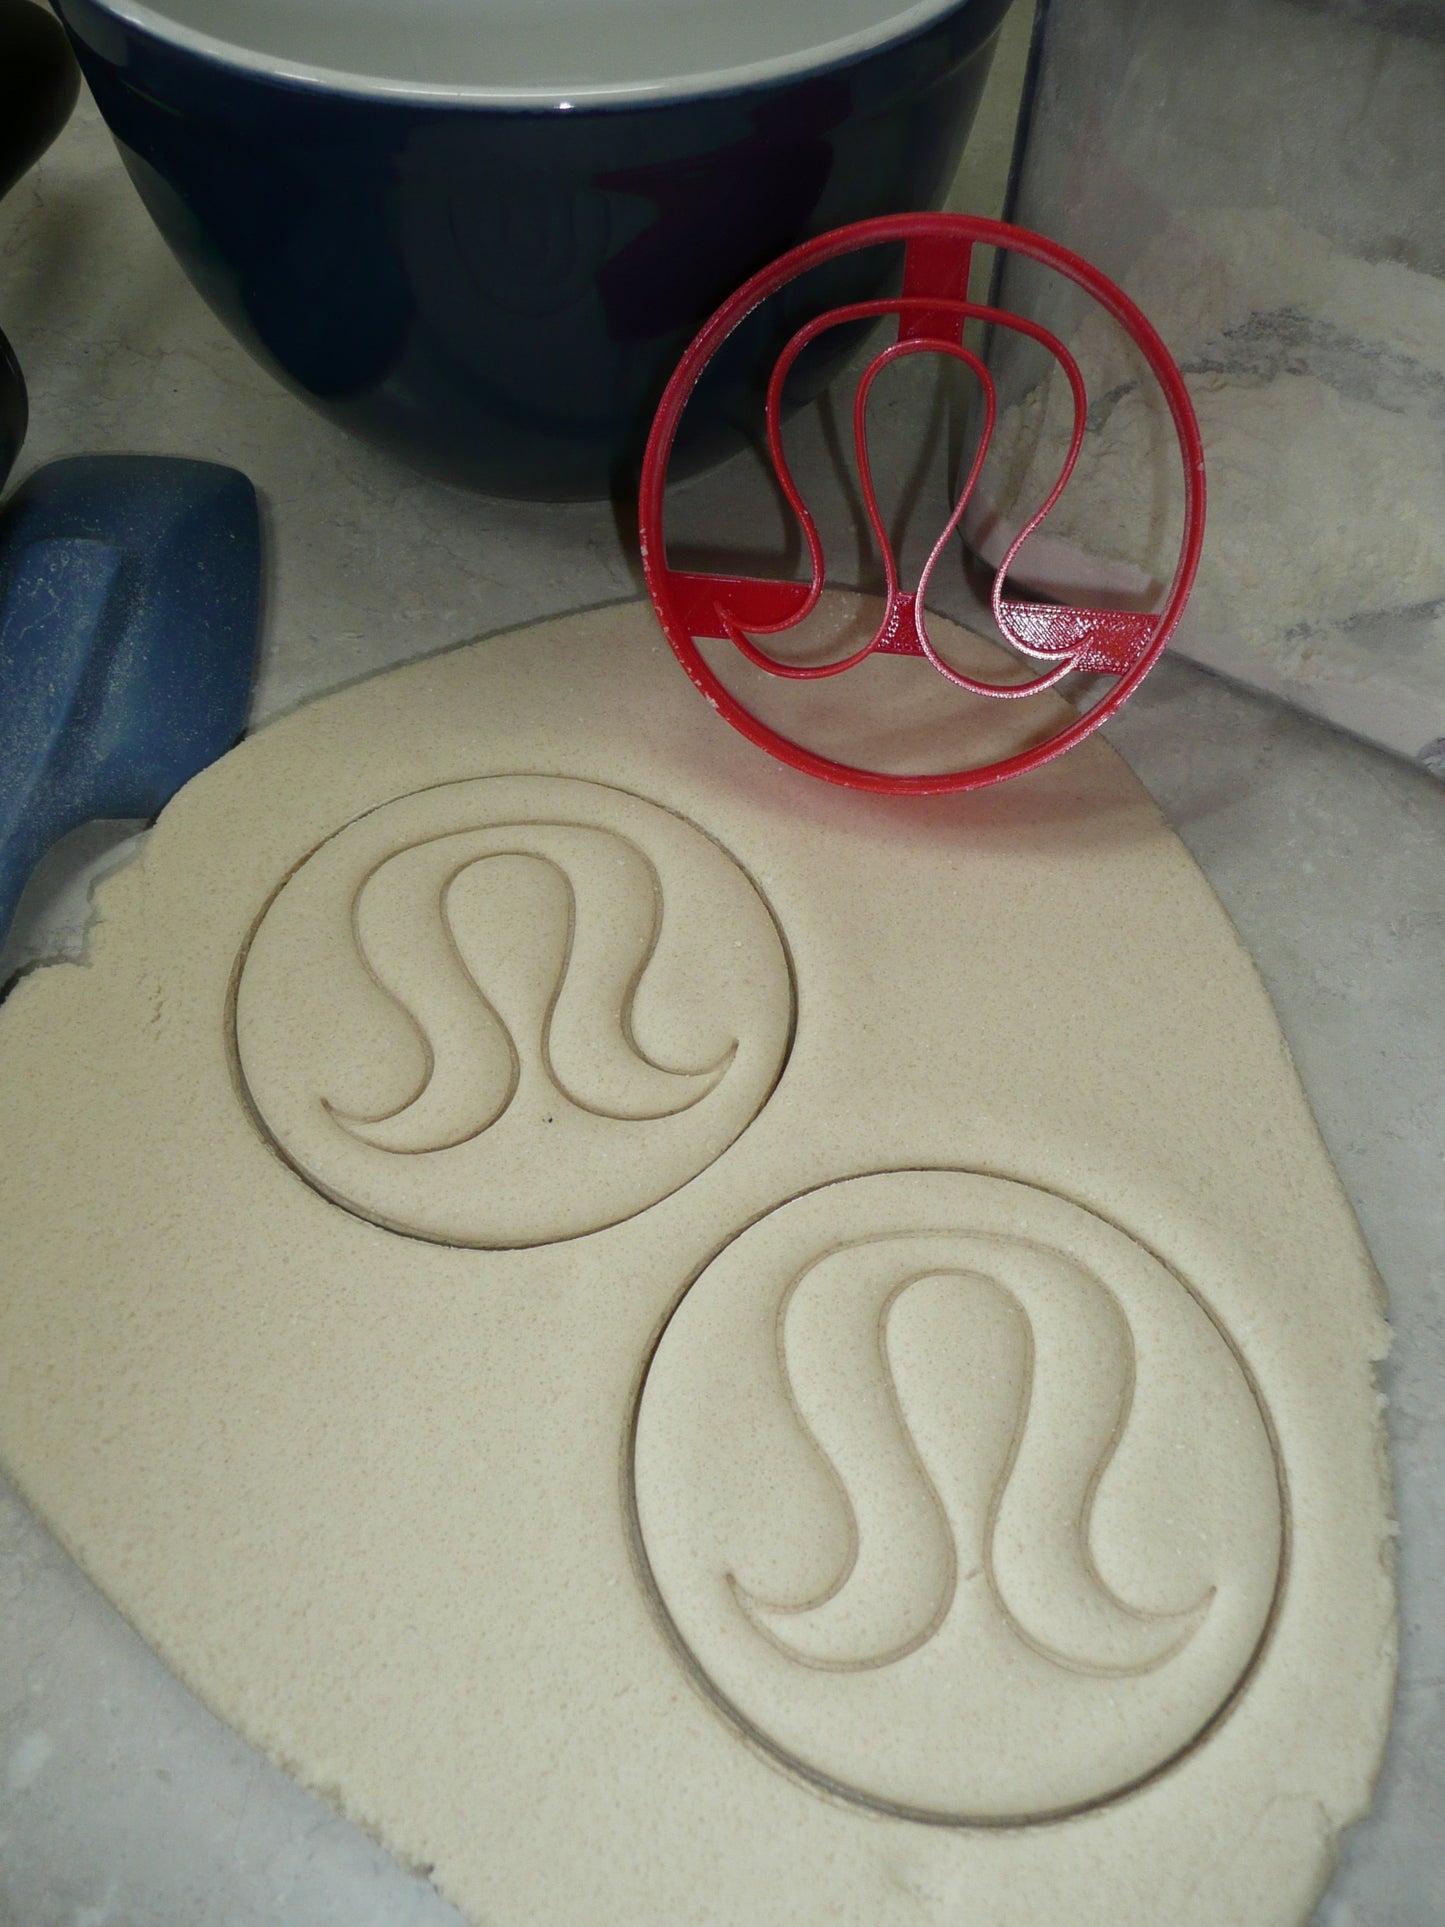 Lululemon Athletic Fitness Apparel Cookie Cutter Made in USA PR4757